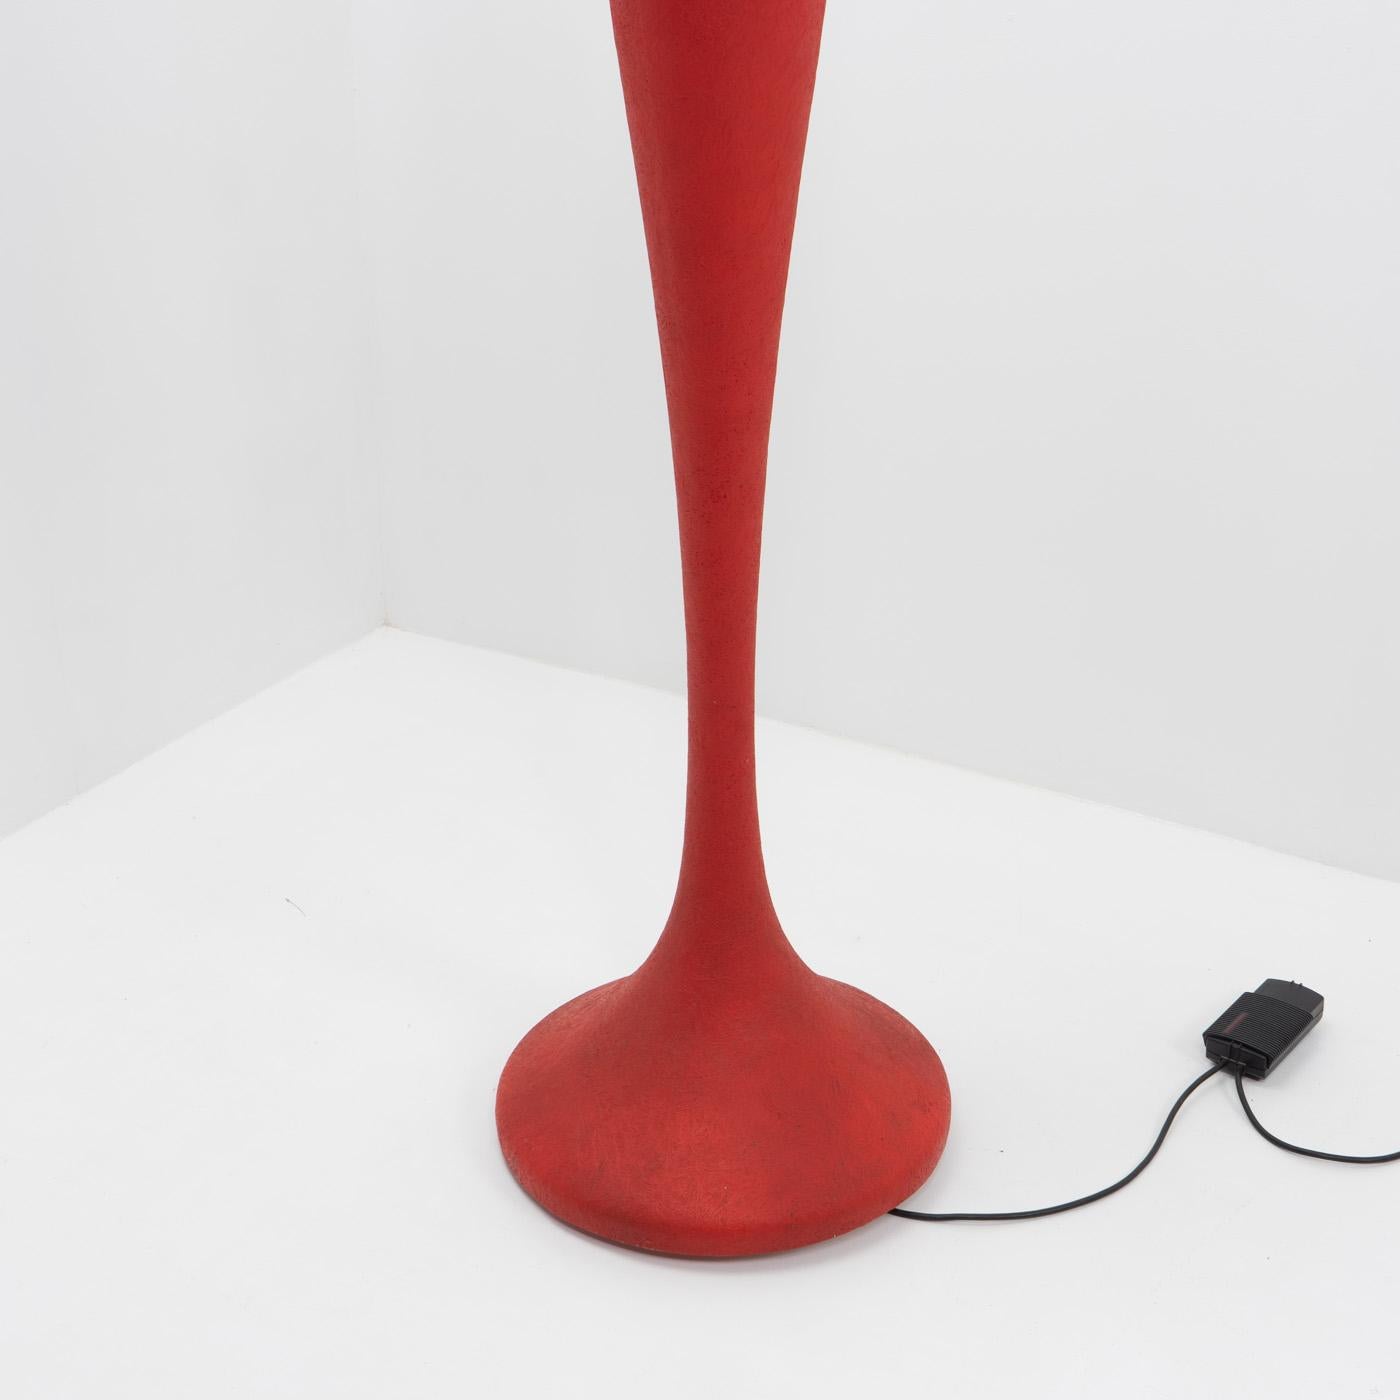 Organically Shaped E.T.A. Floor Lamp by Guglielmo Berchicci for Kundalini, 2000s For Sale 3